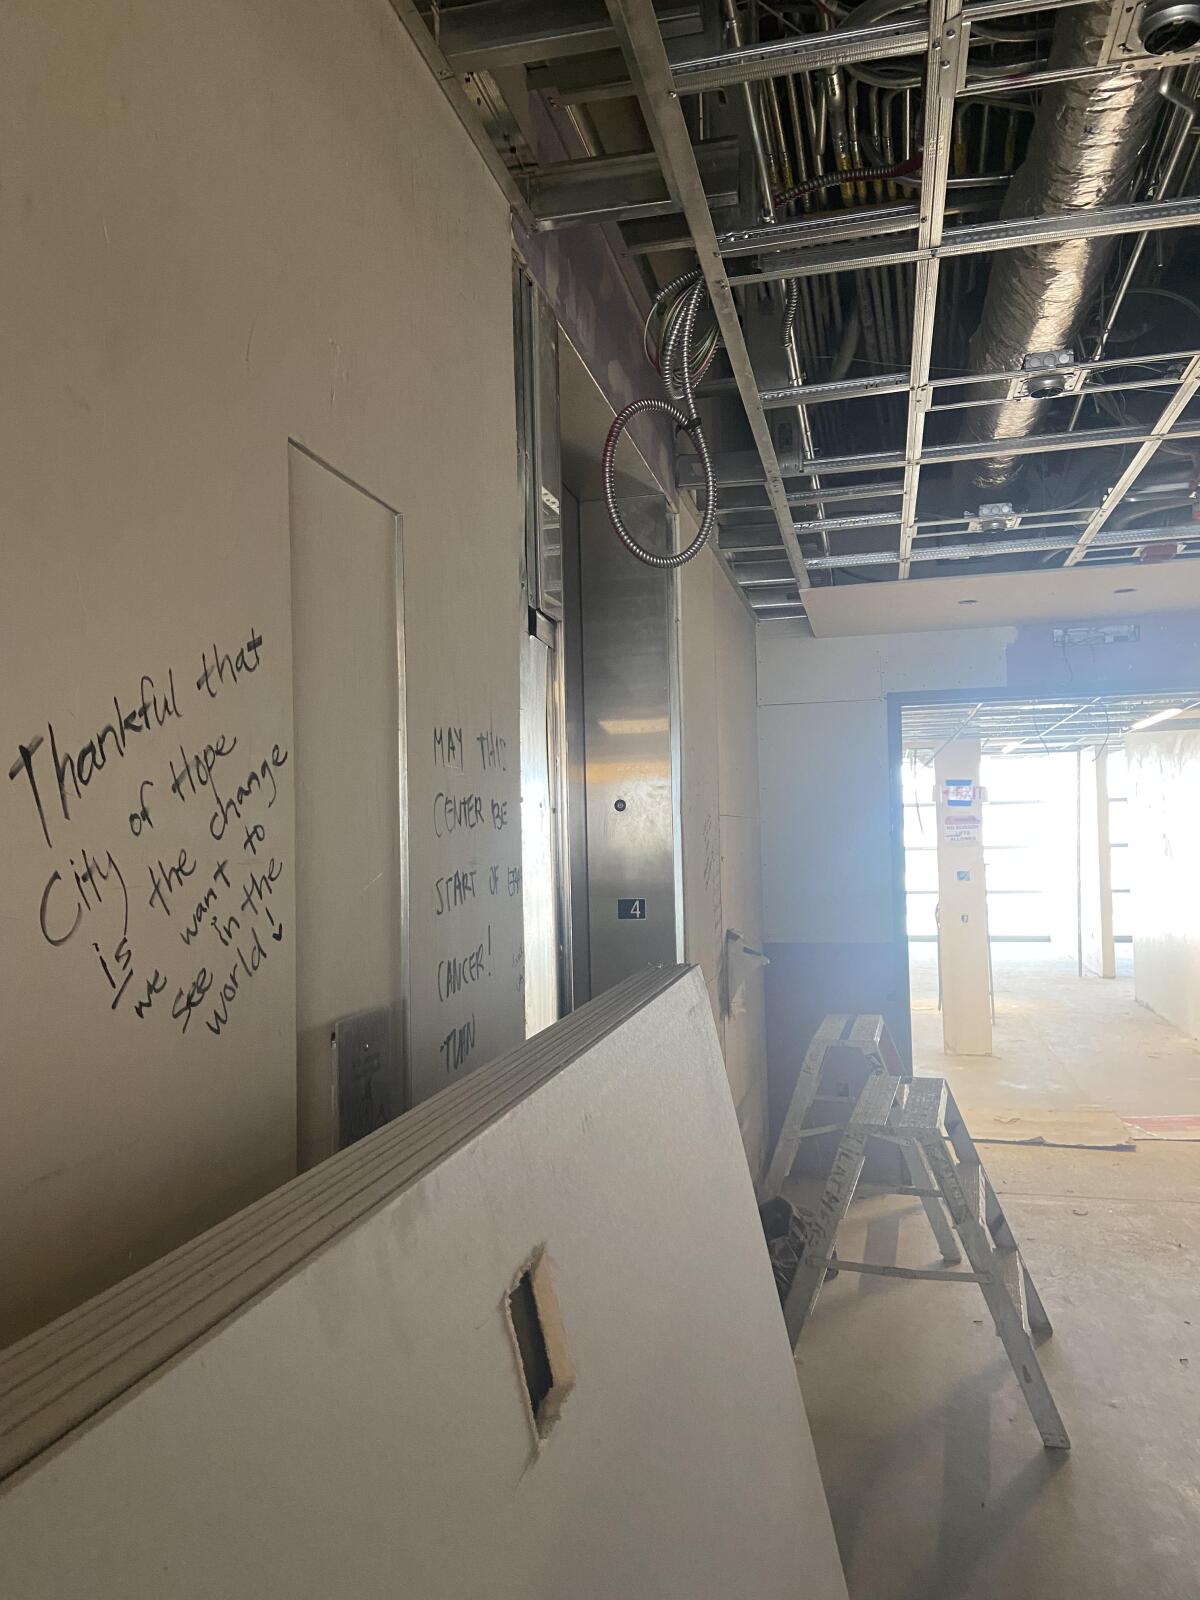 People have written messages on the walls of City of Hope's new cancer center.